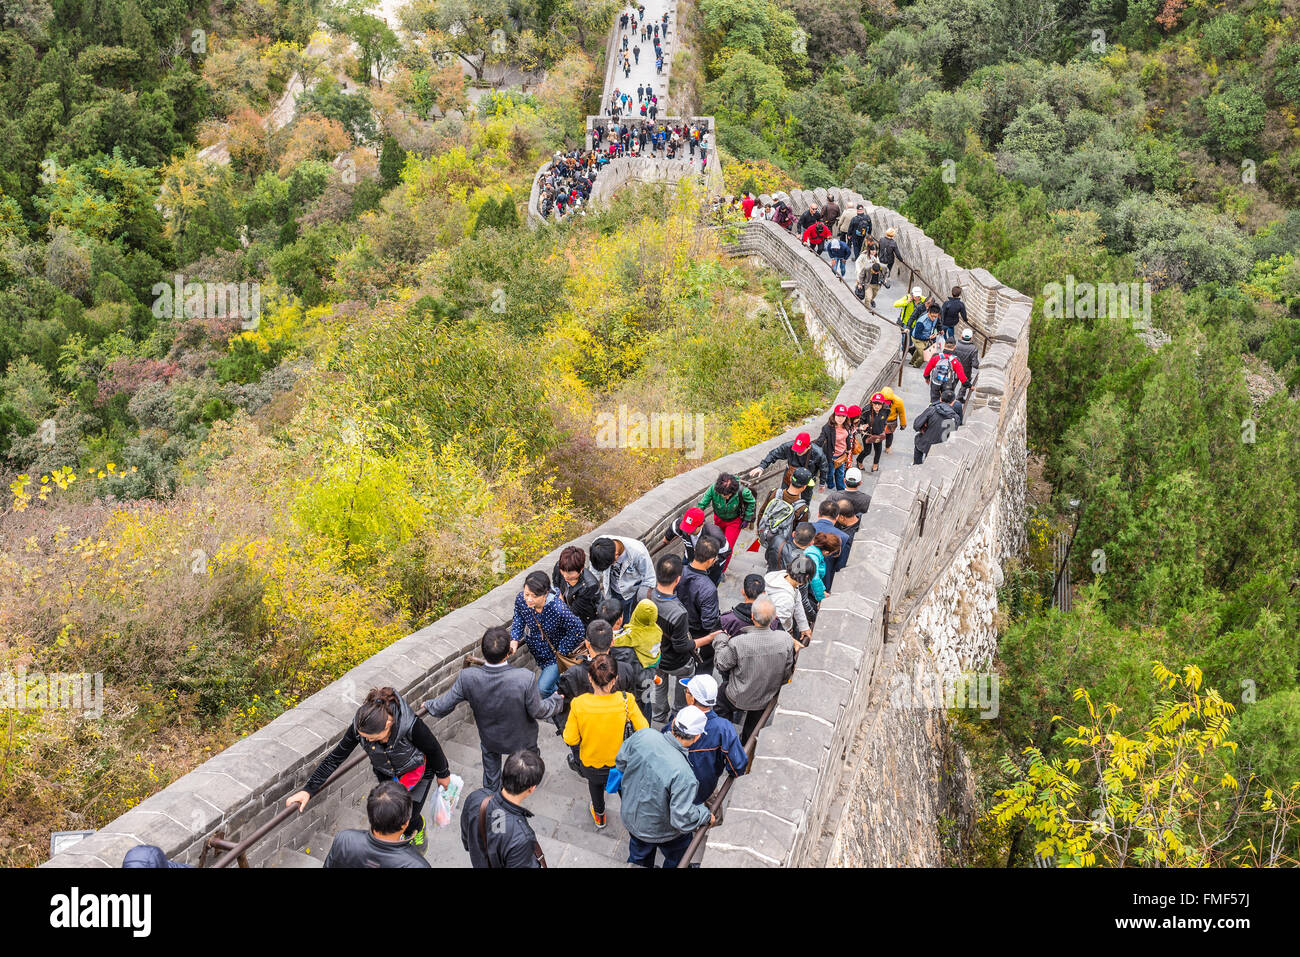 A view of the Great Wall in Beijing, China. The Visitors are both locals and foreigners. Stock Photo